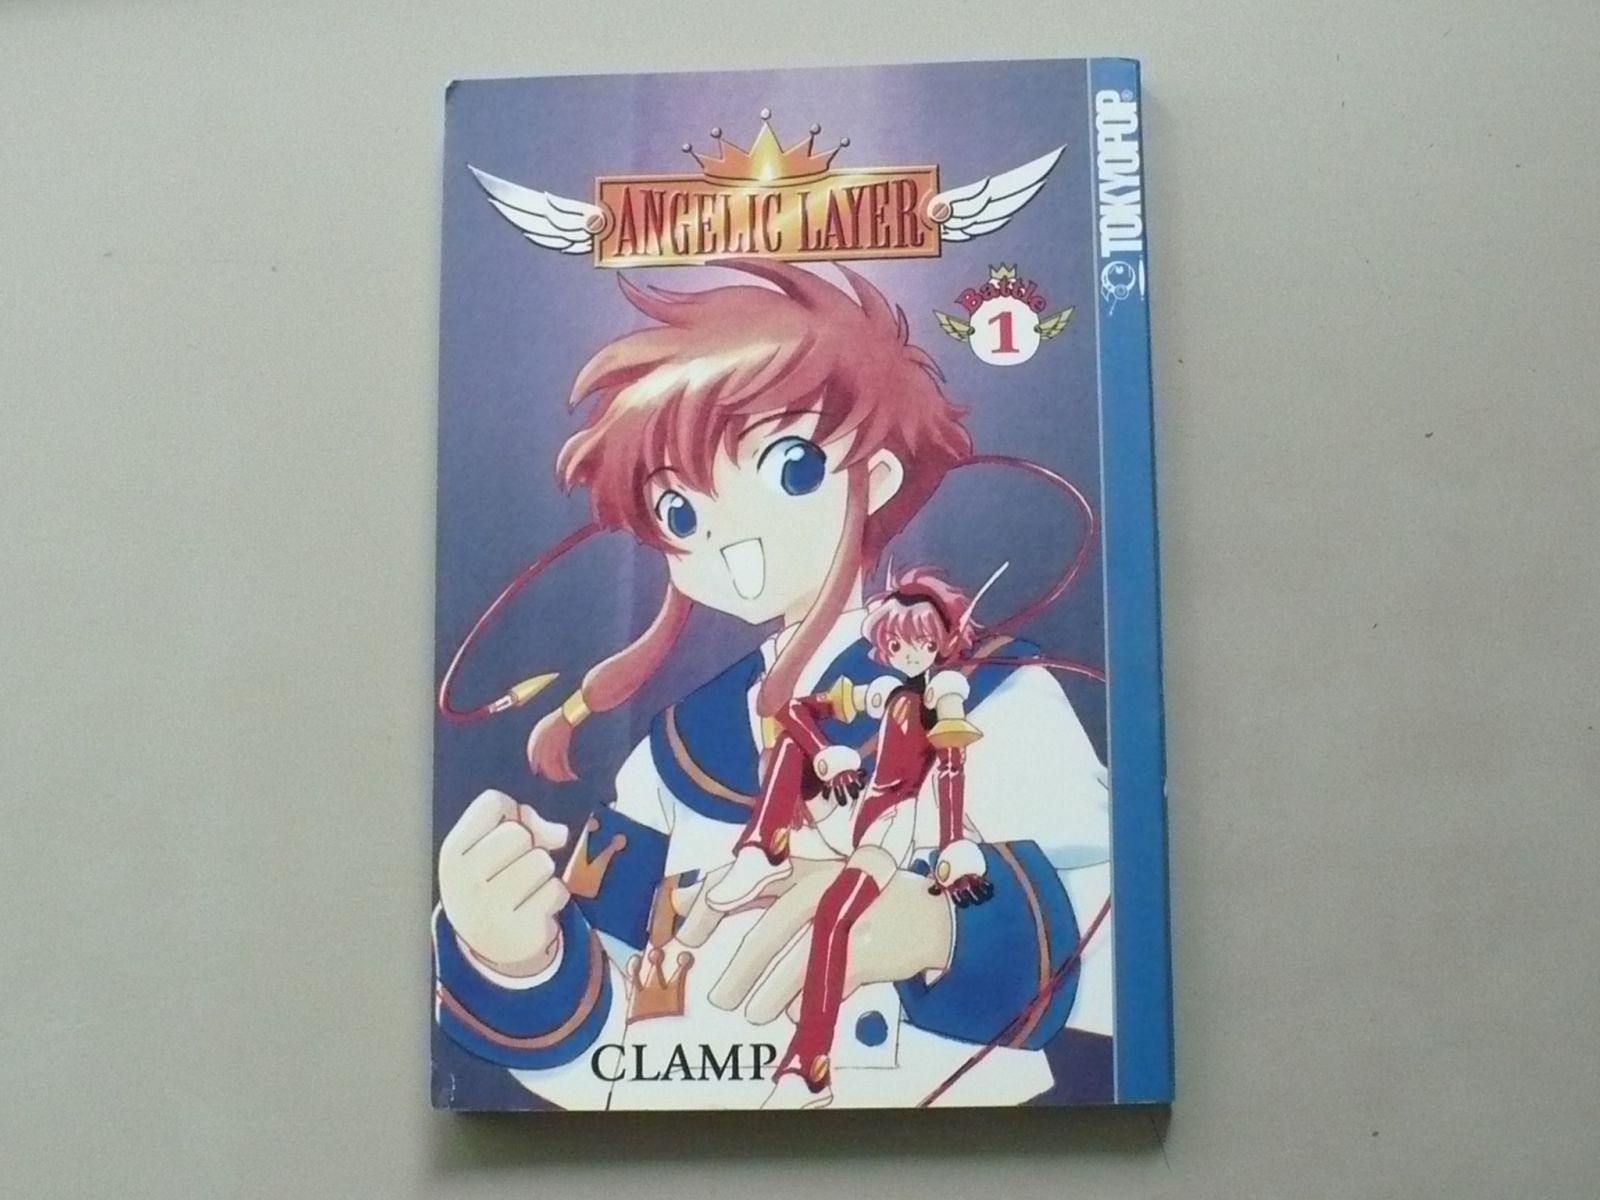 Clamp - Angelic Layer volume 1 (2002) anglicky